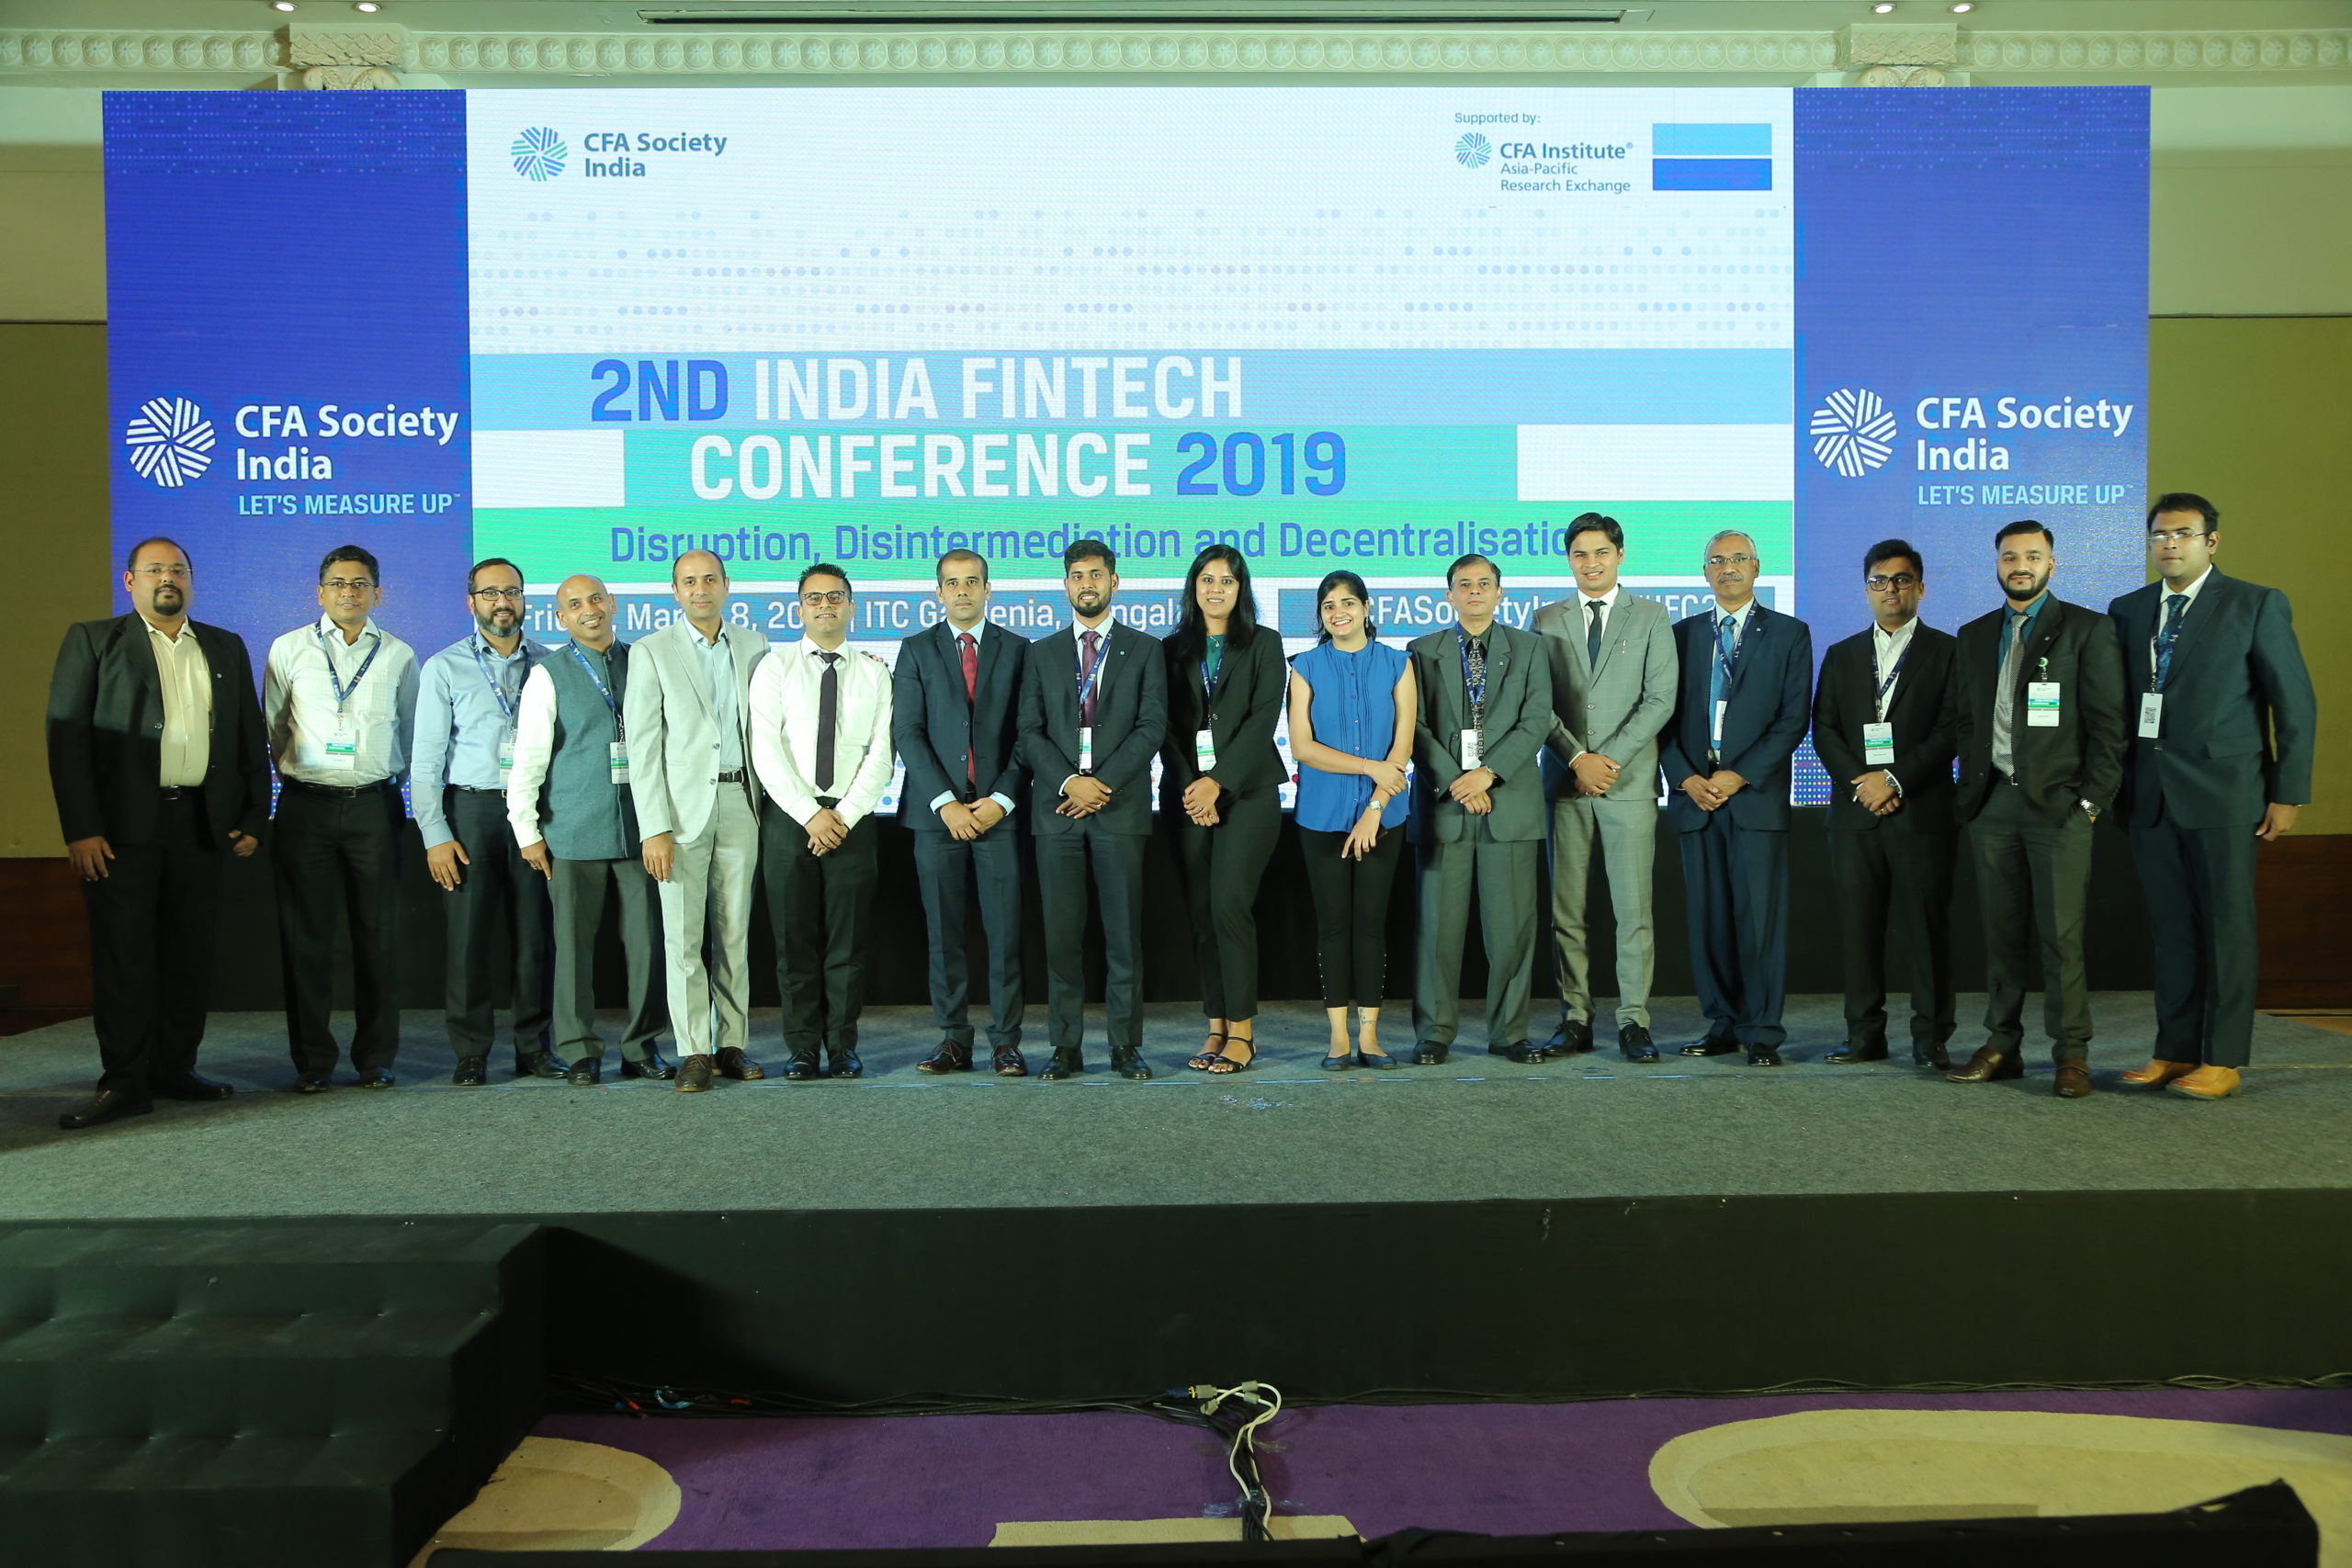 2nd India Fintech Conference 2019 CFA Society India